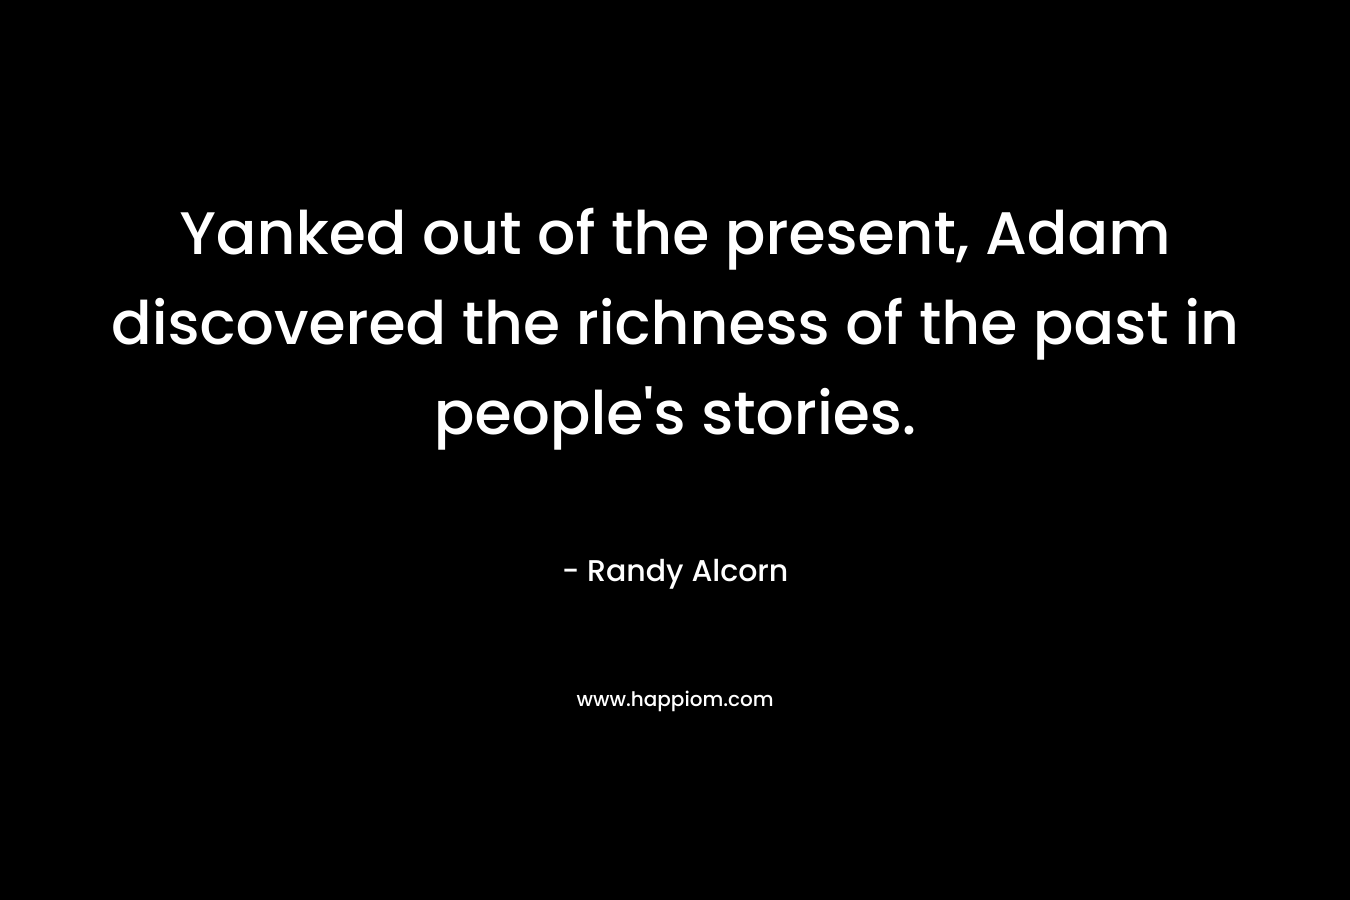 Yanked out of the present, Adam discovered the richness of the past in people's stories.